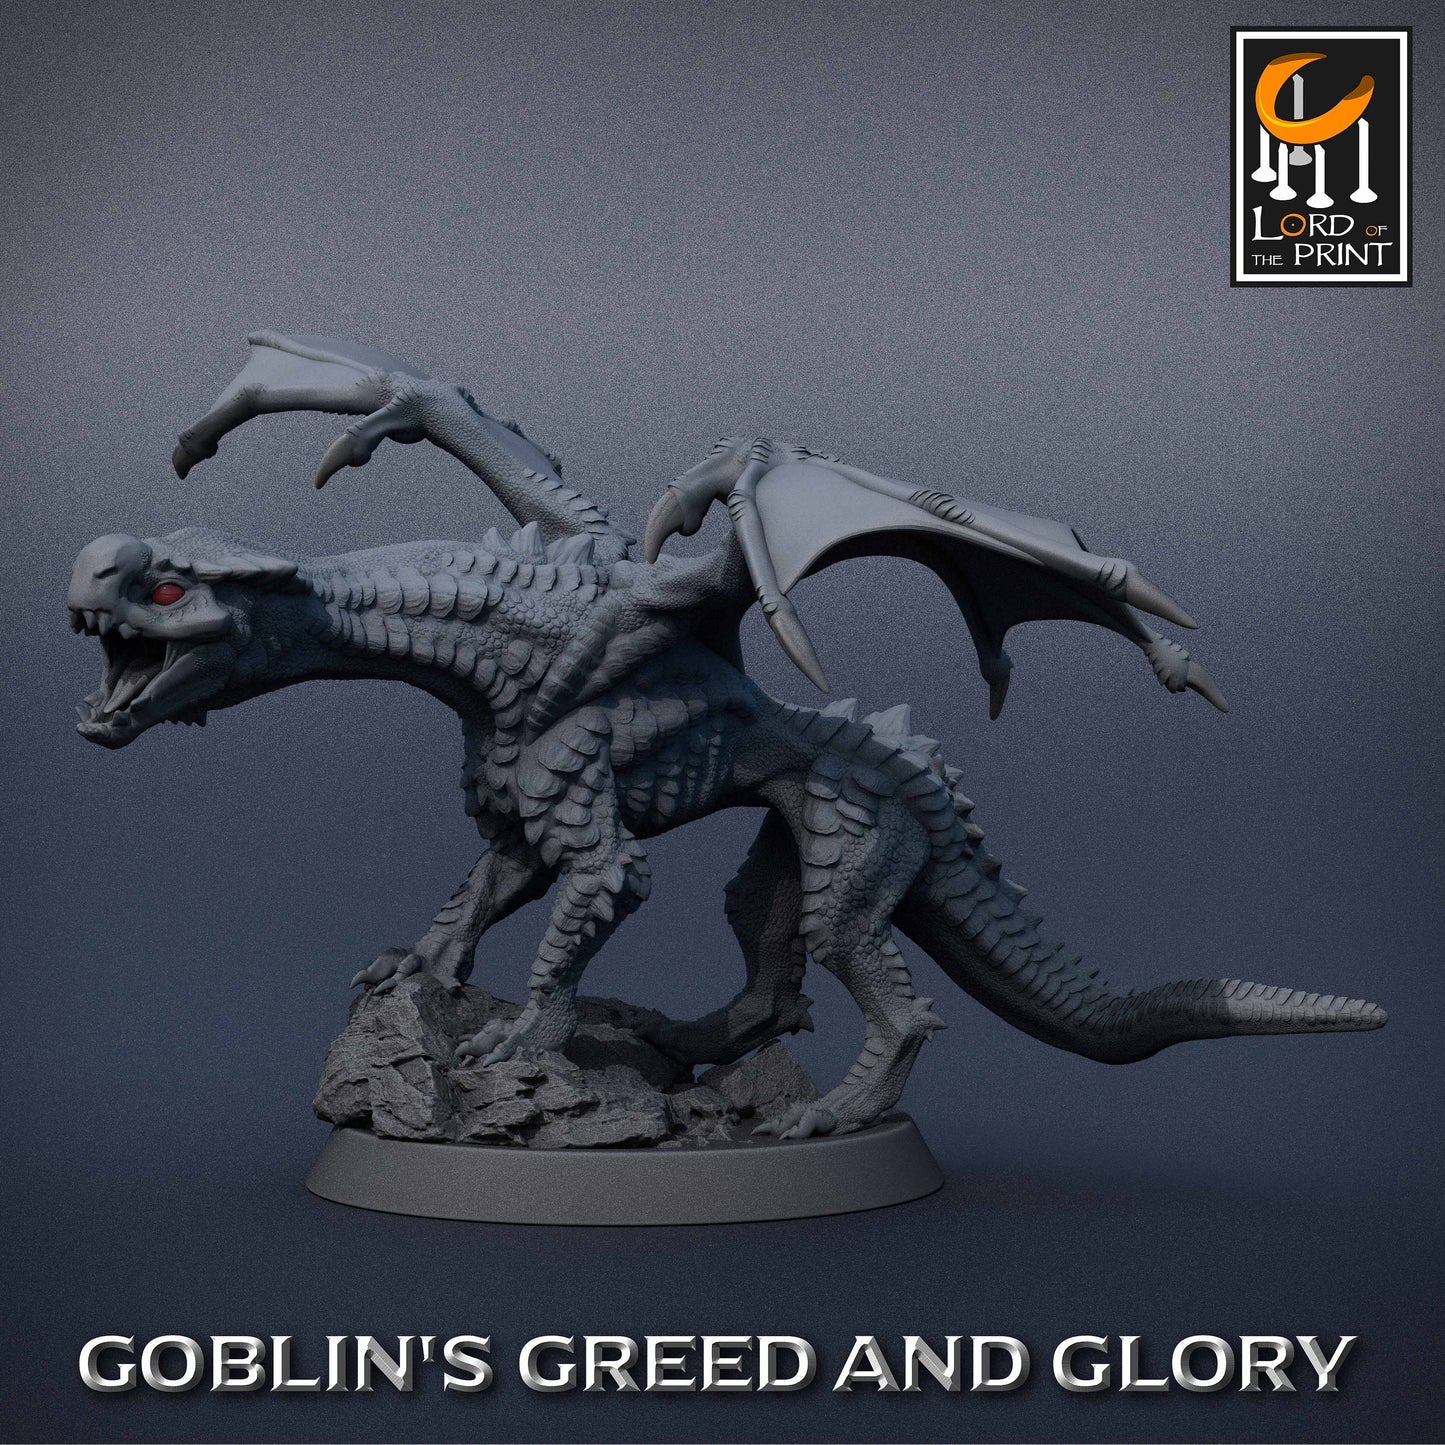 Green Chromatic Dragon | RPG Miniature for Dungeons and Dragons|Pathfinder|Tabletop Wargaming | Dragon Miniature | Lord of the Print